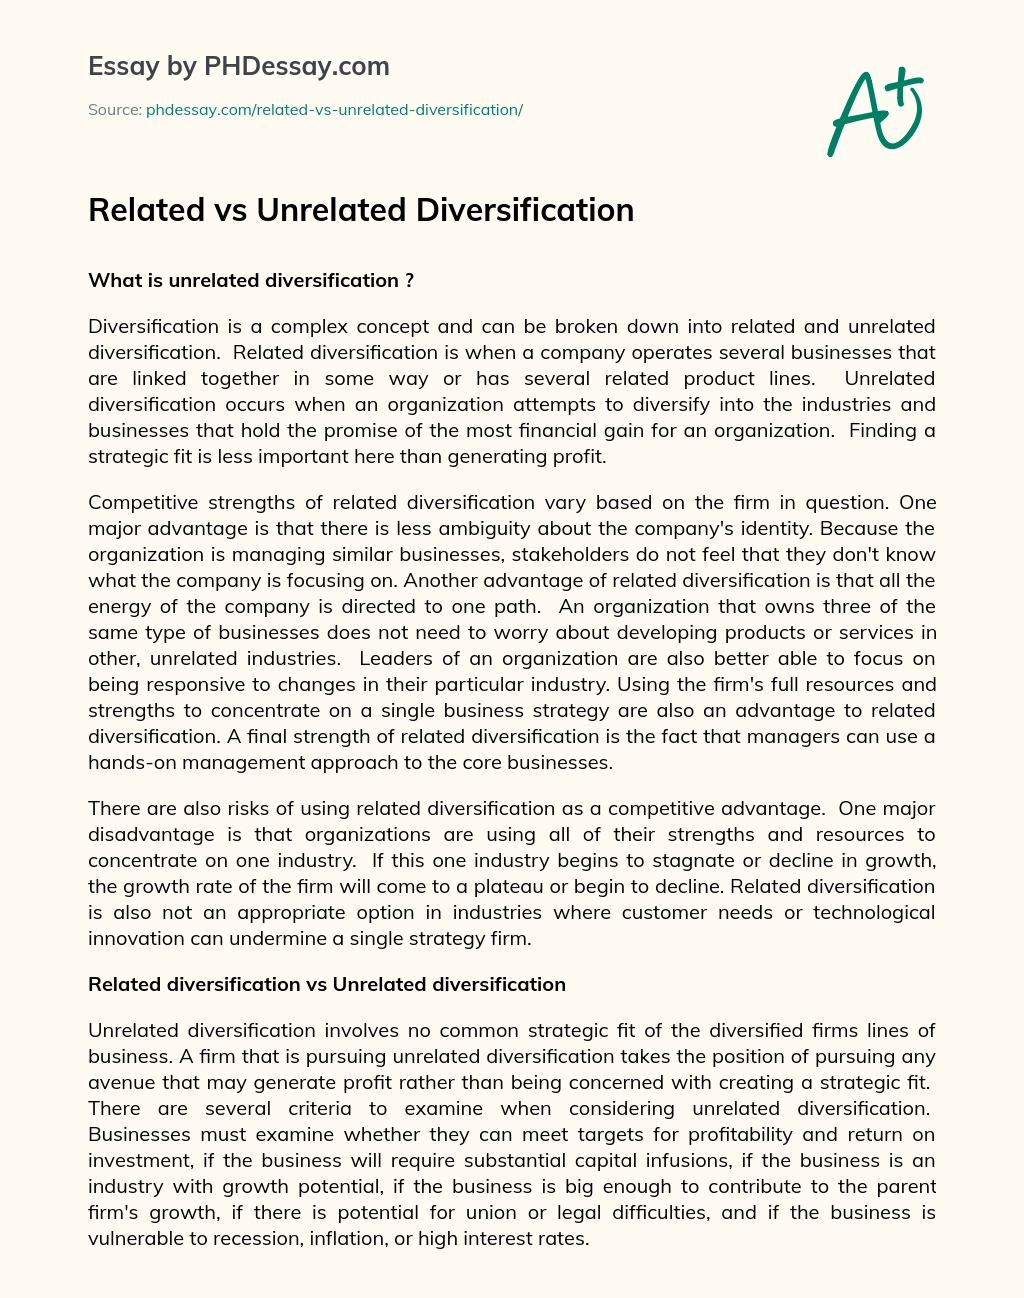 Related vs Unrelated Diversification essay